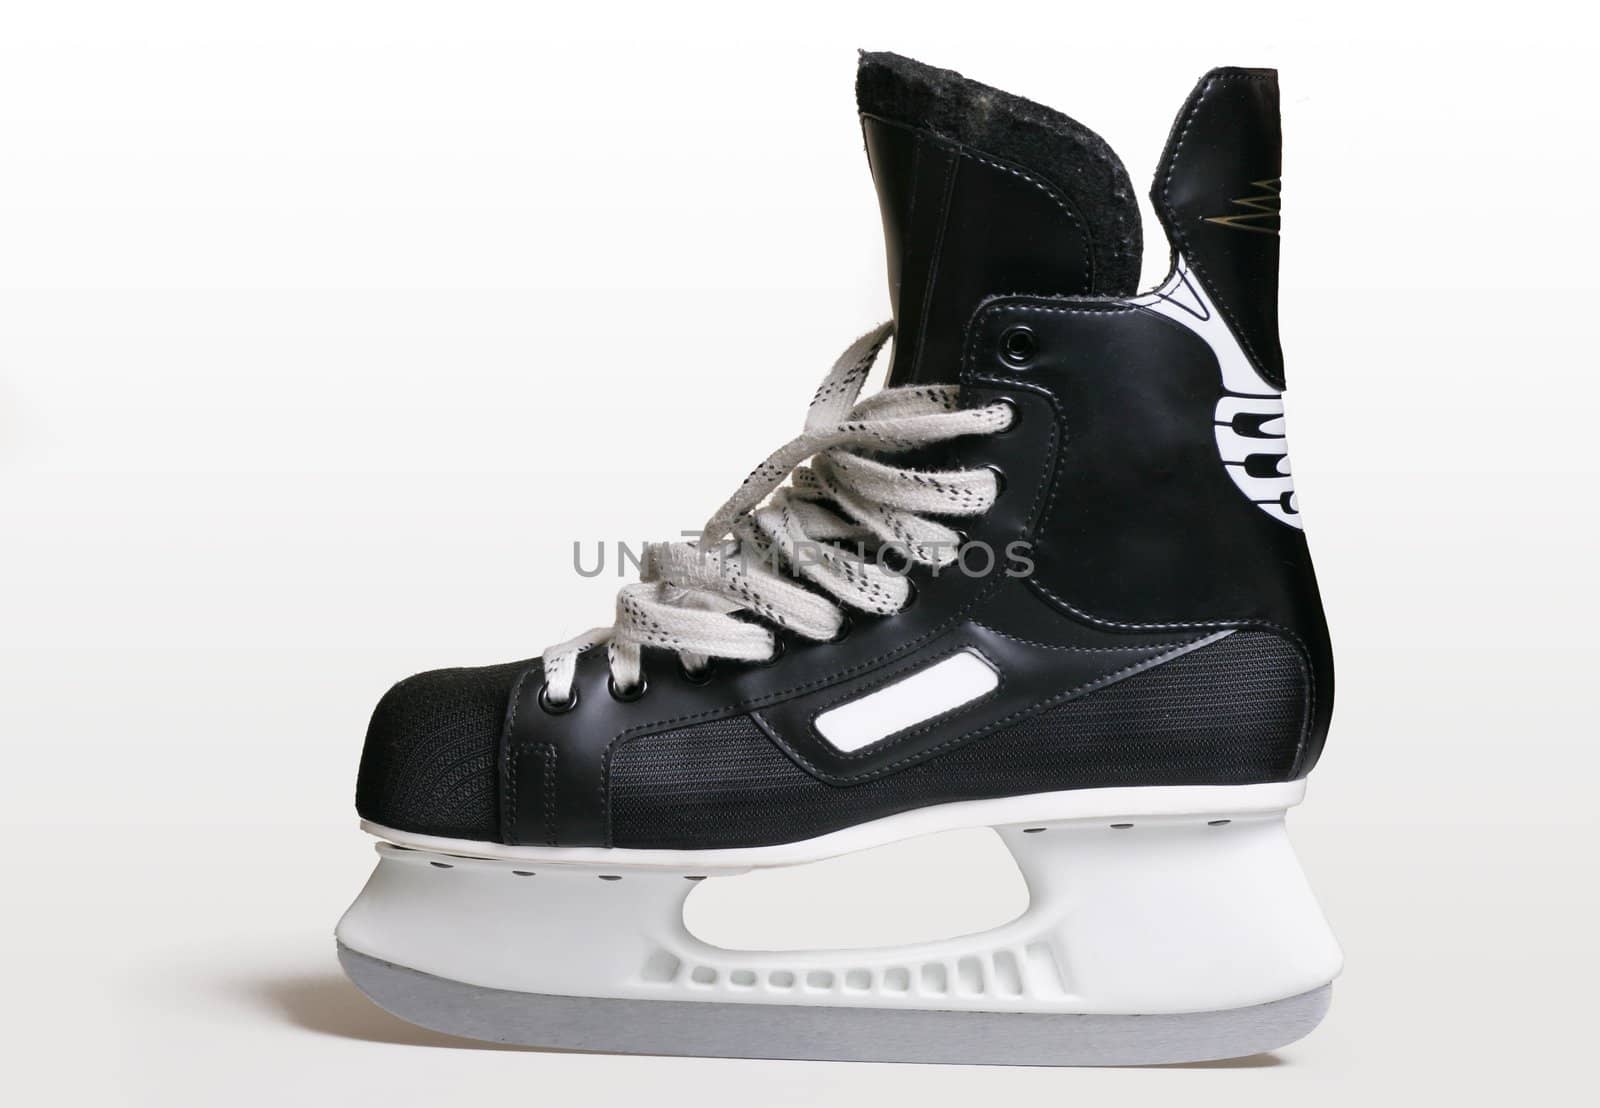 Ice skate on a white background